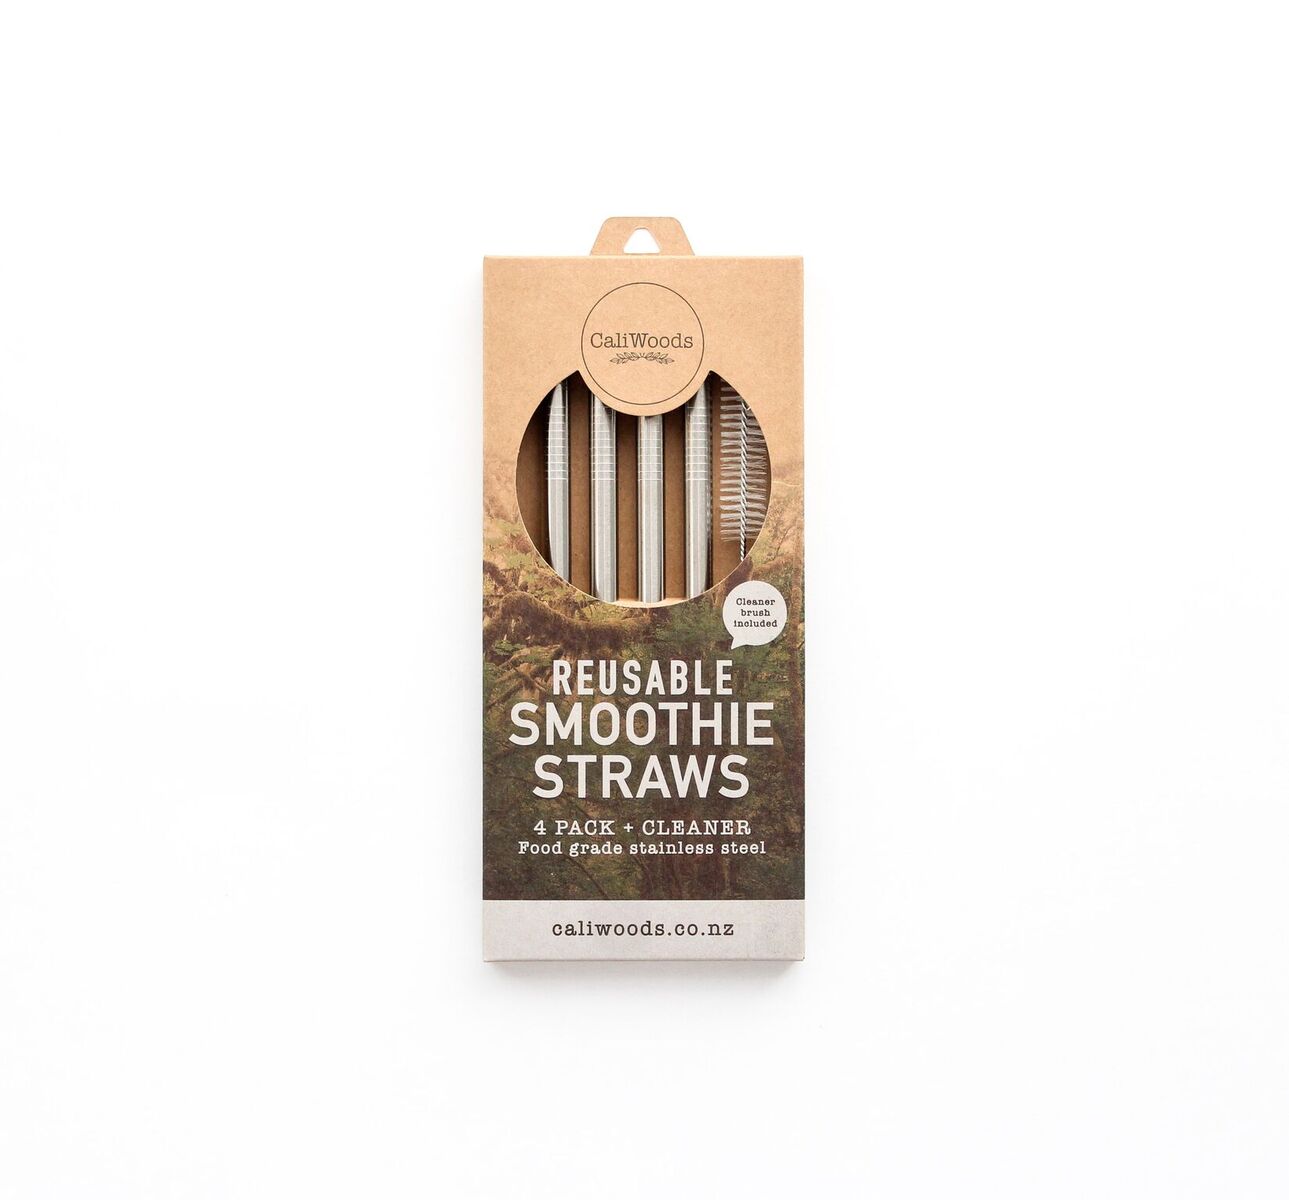 Caliwoods stainless steel smoothie straws, $20 from Ohnatural.co.nz